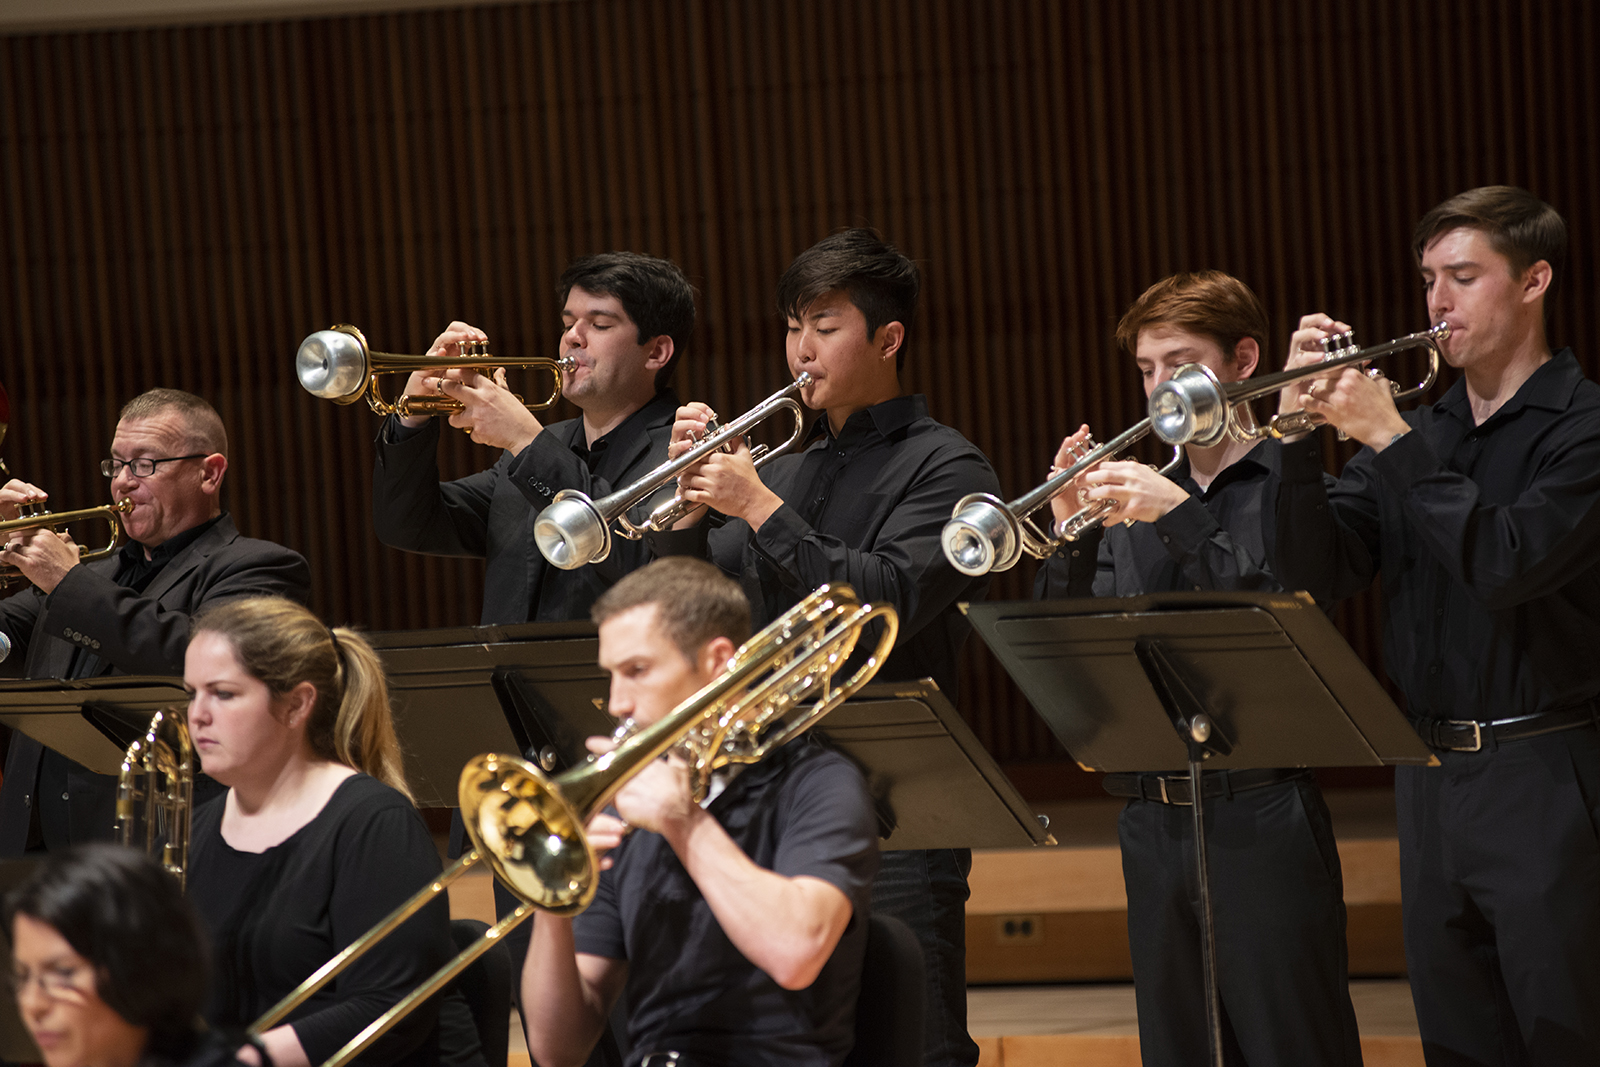 Members of the UMD Jazz Ensemble play trumpets during a concert.